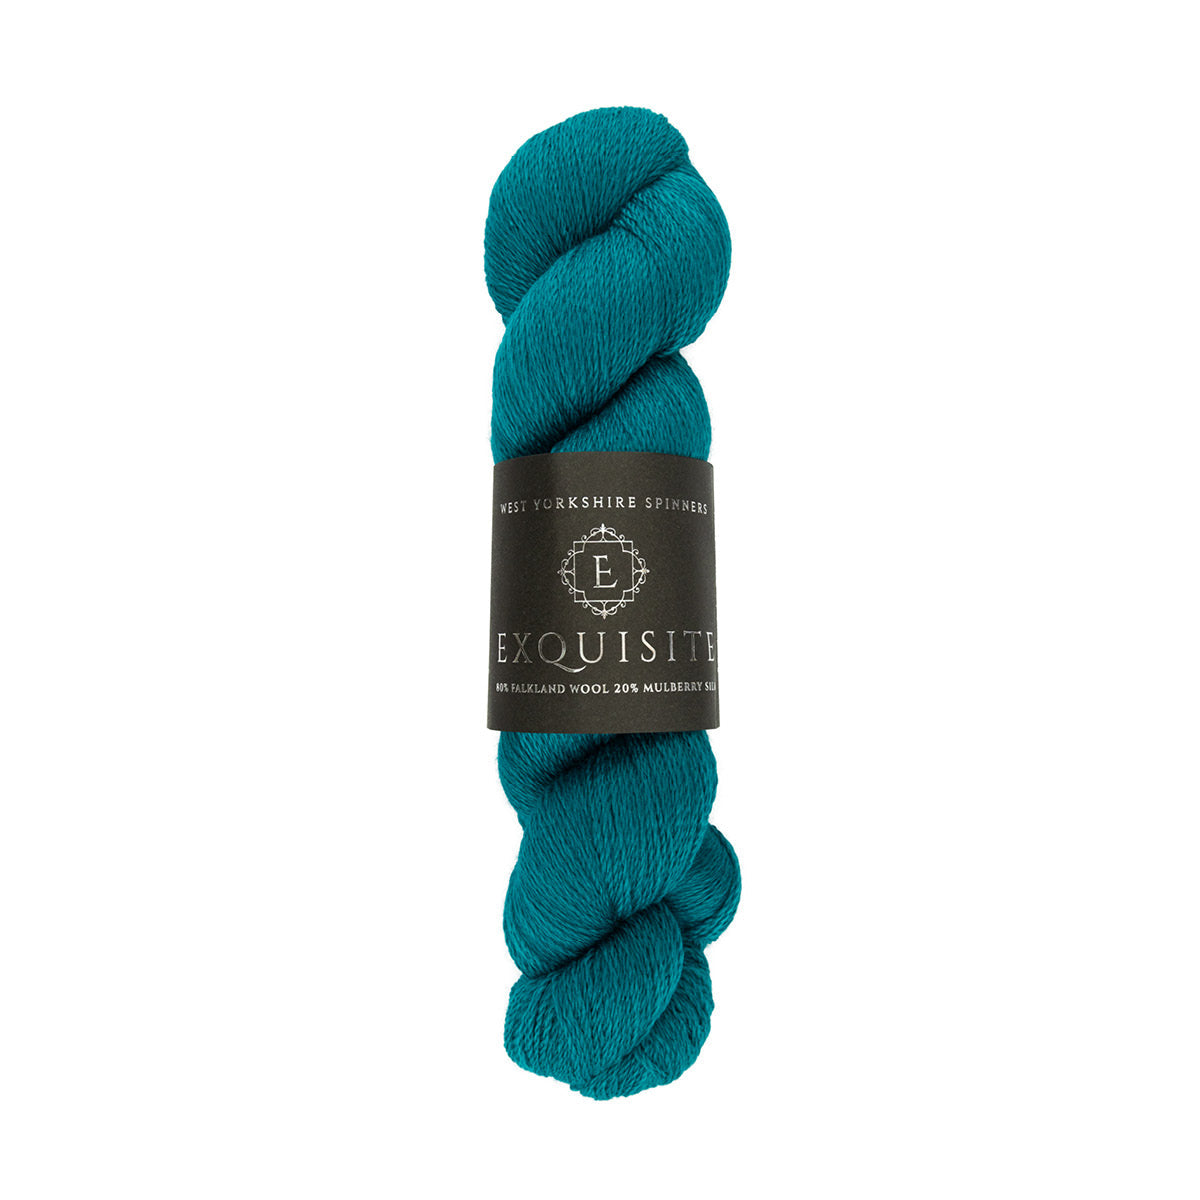 WYS West Yorkshire Spinners Exquisite Lace hank or skein in teal dark sea green shade savoy 371